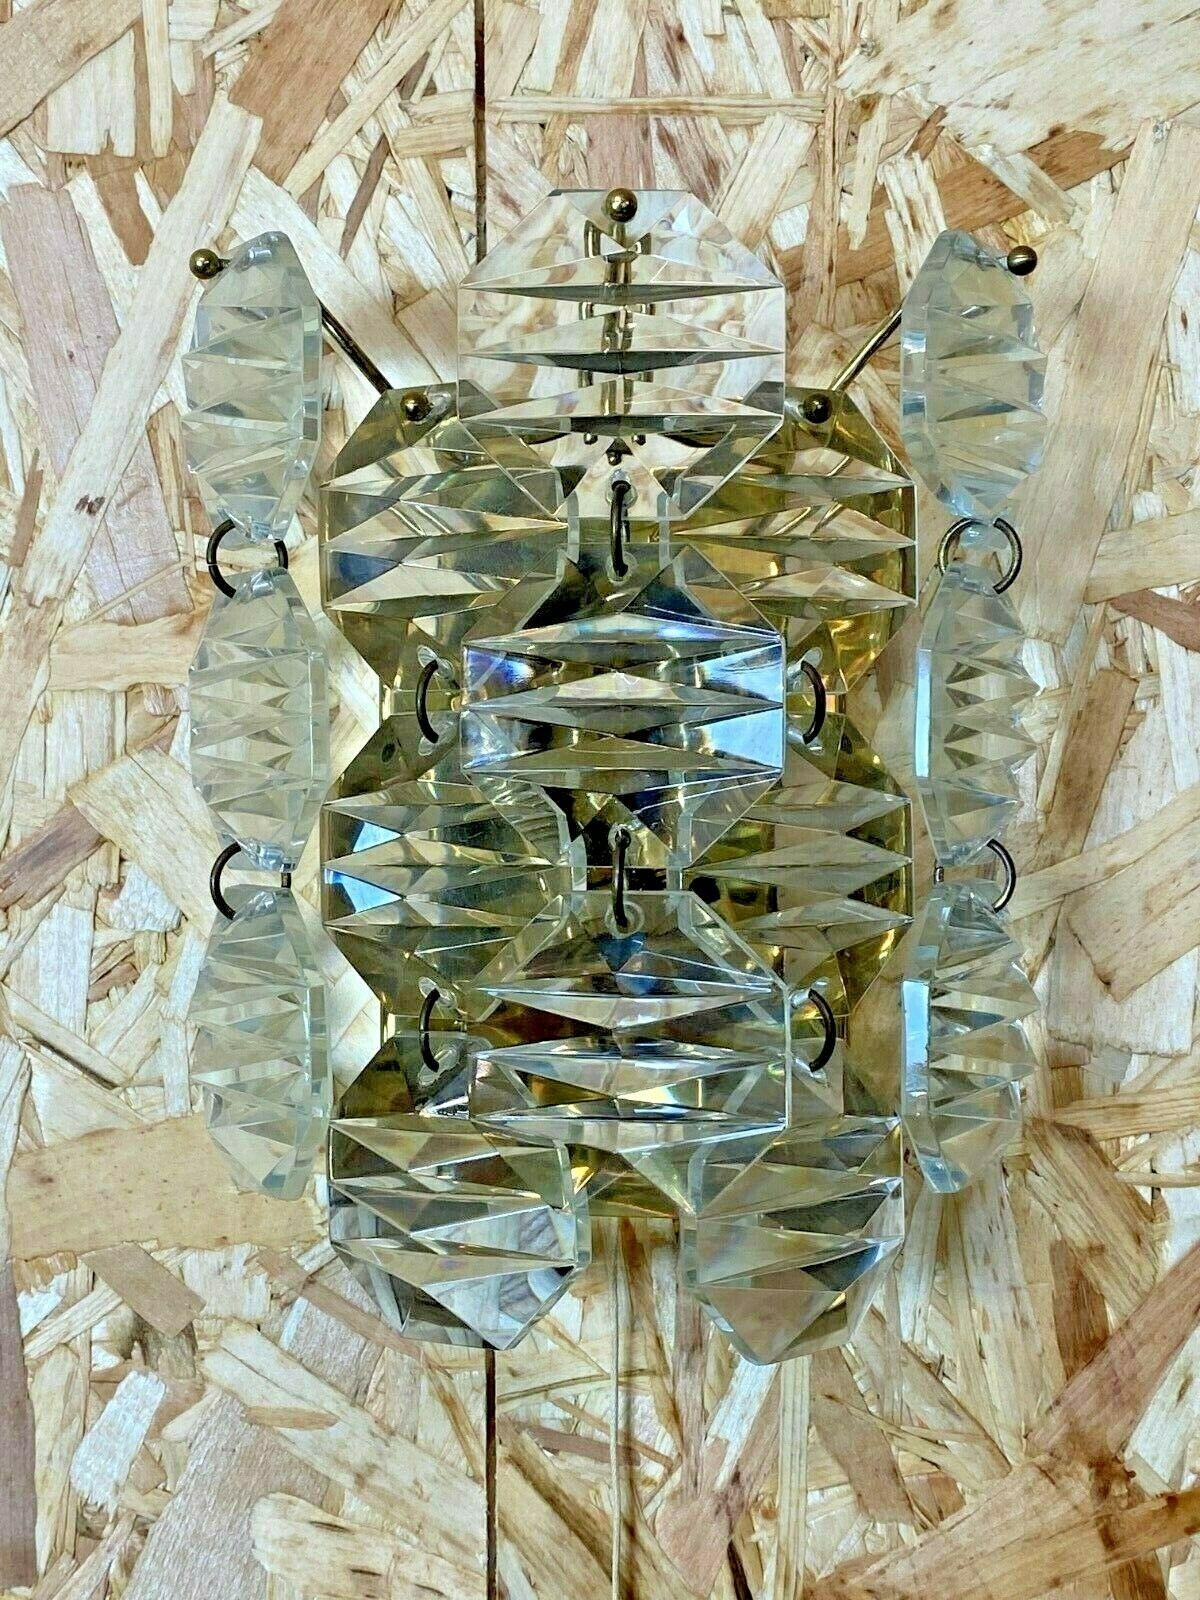 60s 70s Kinkeldey Wall Light Glass Wall Lamp Space Age Design 60s 70s

Object: wall lamp

Manufacturer: Kinkeldey

Condition: good

Age: around 1960-1970

Dimensions:

18cm x 10.5cm x 22cm

Other notes:

The pictures serve as part of